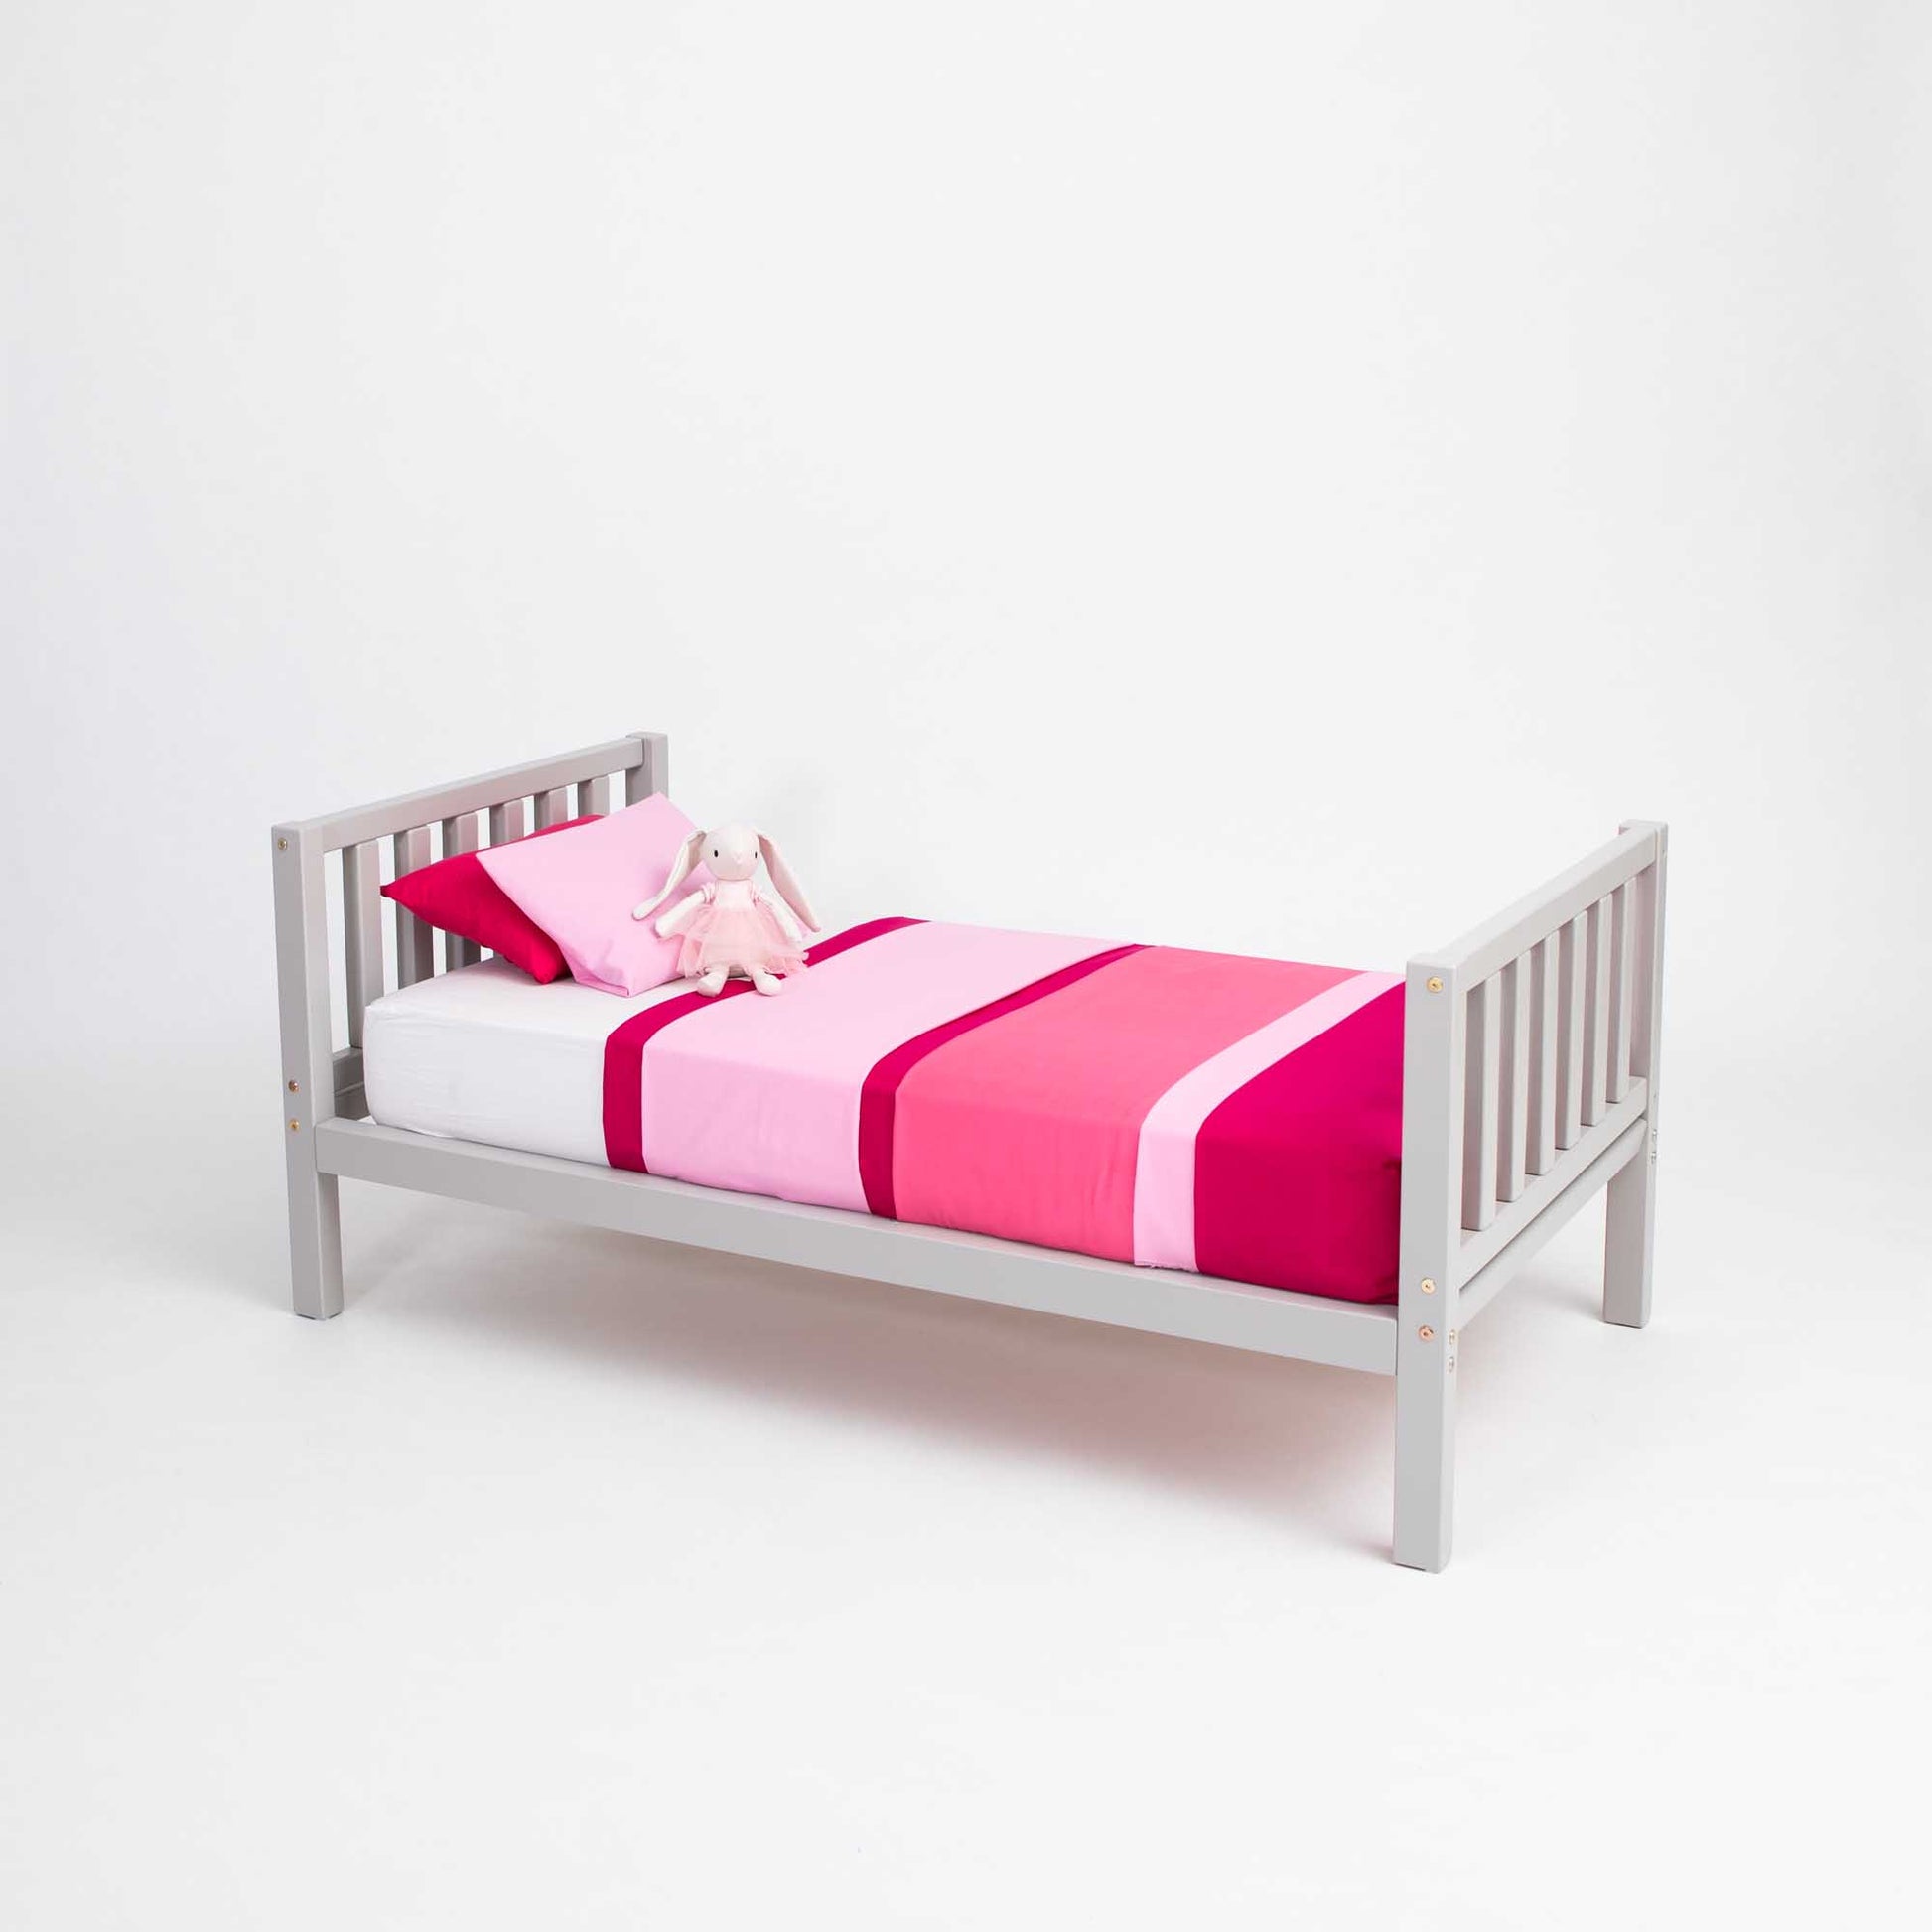 A 2-in-1 kid's bed on legs with a vertical rail headboard and footboard with pink and white bedding.